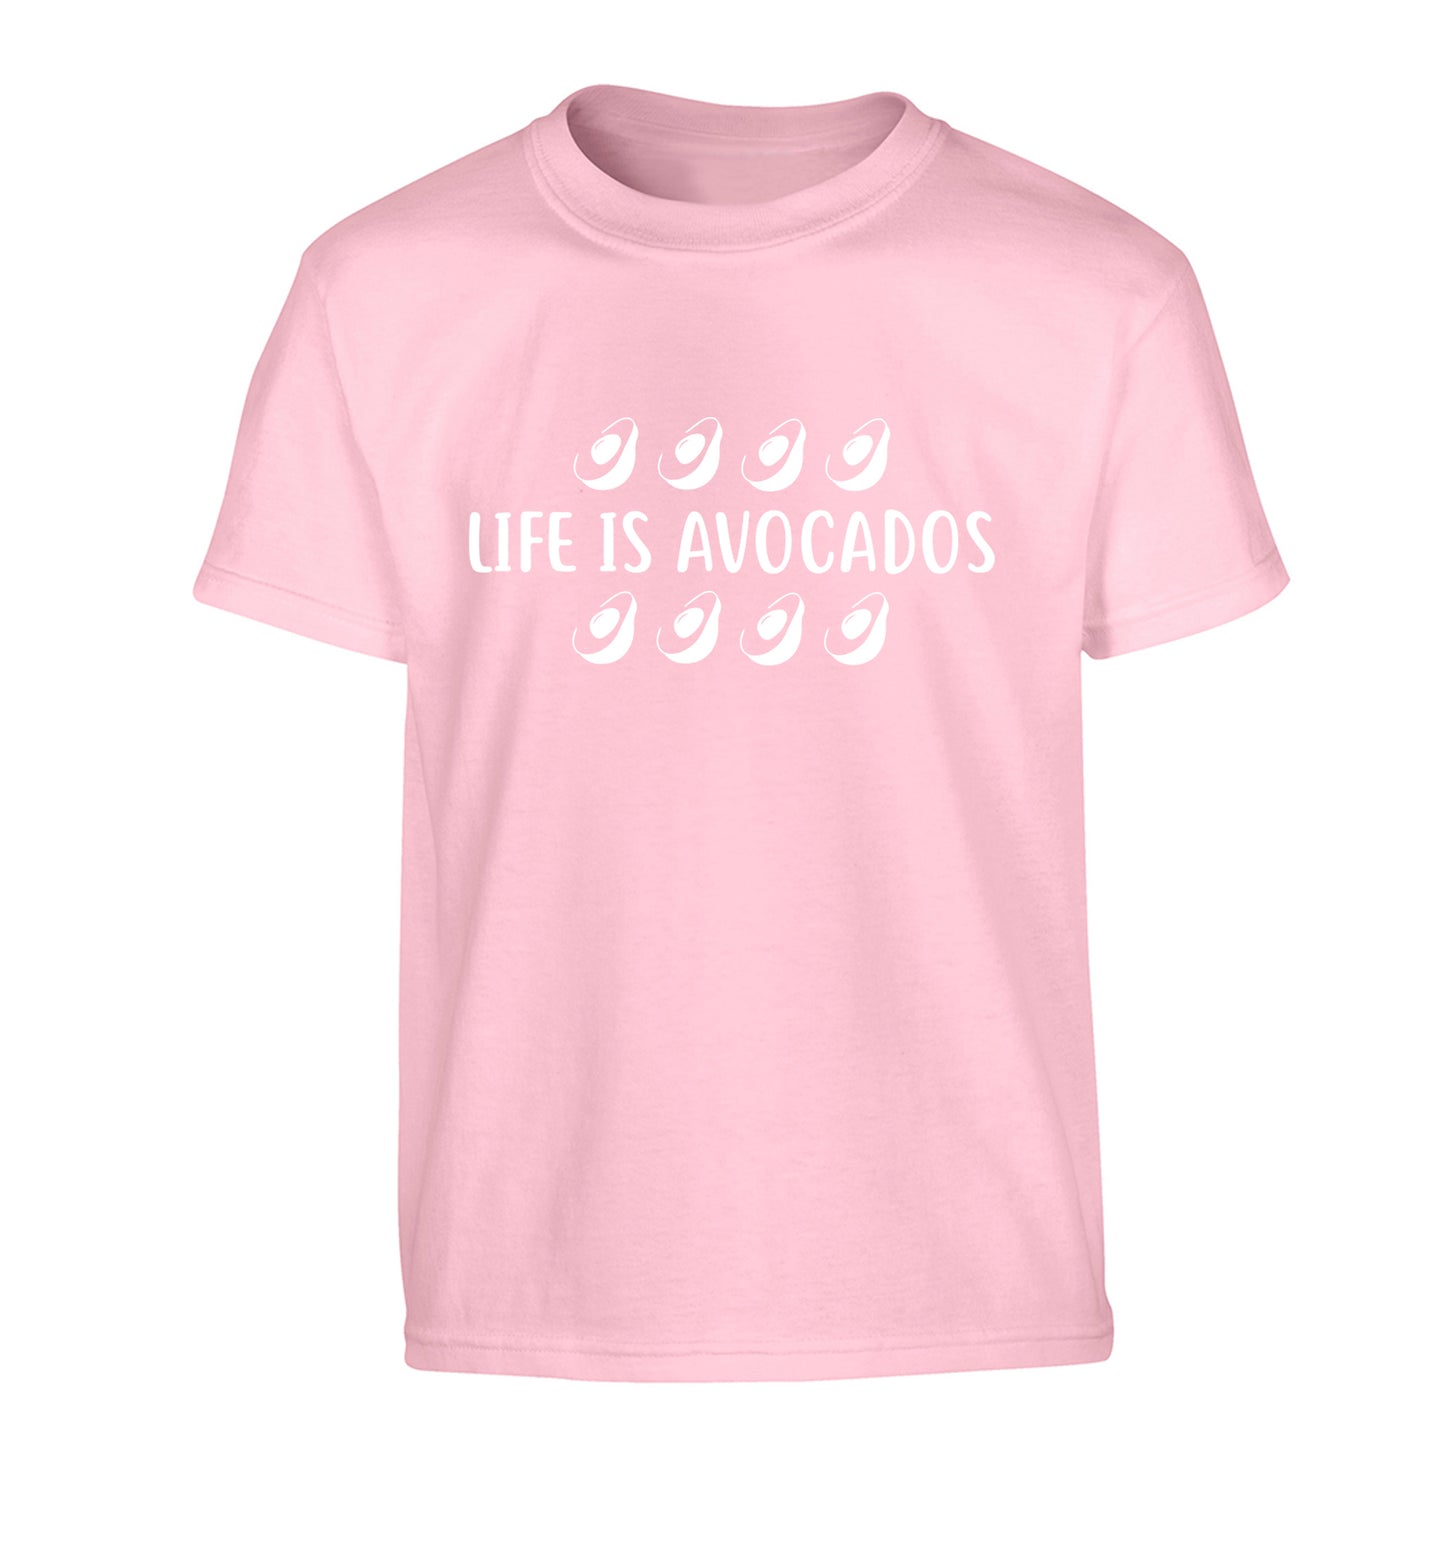 Life is avocados Children's light pink Tshirt 12-14 Years